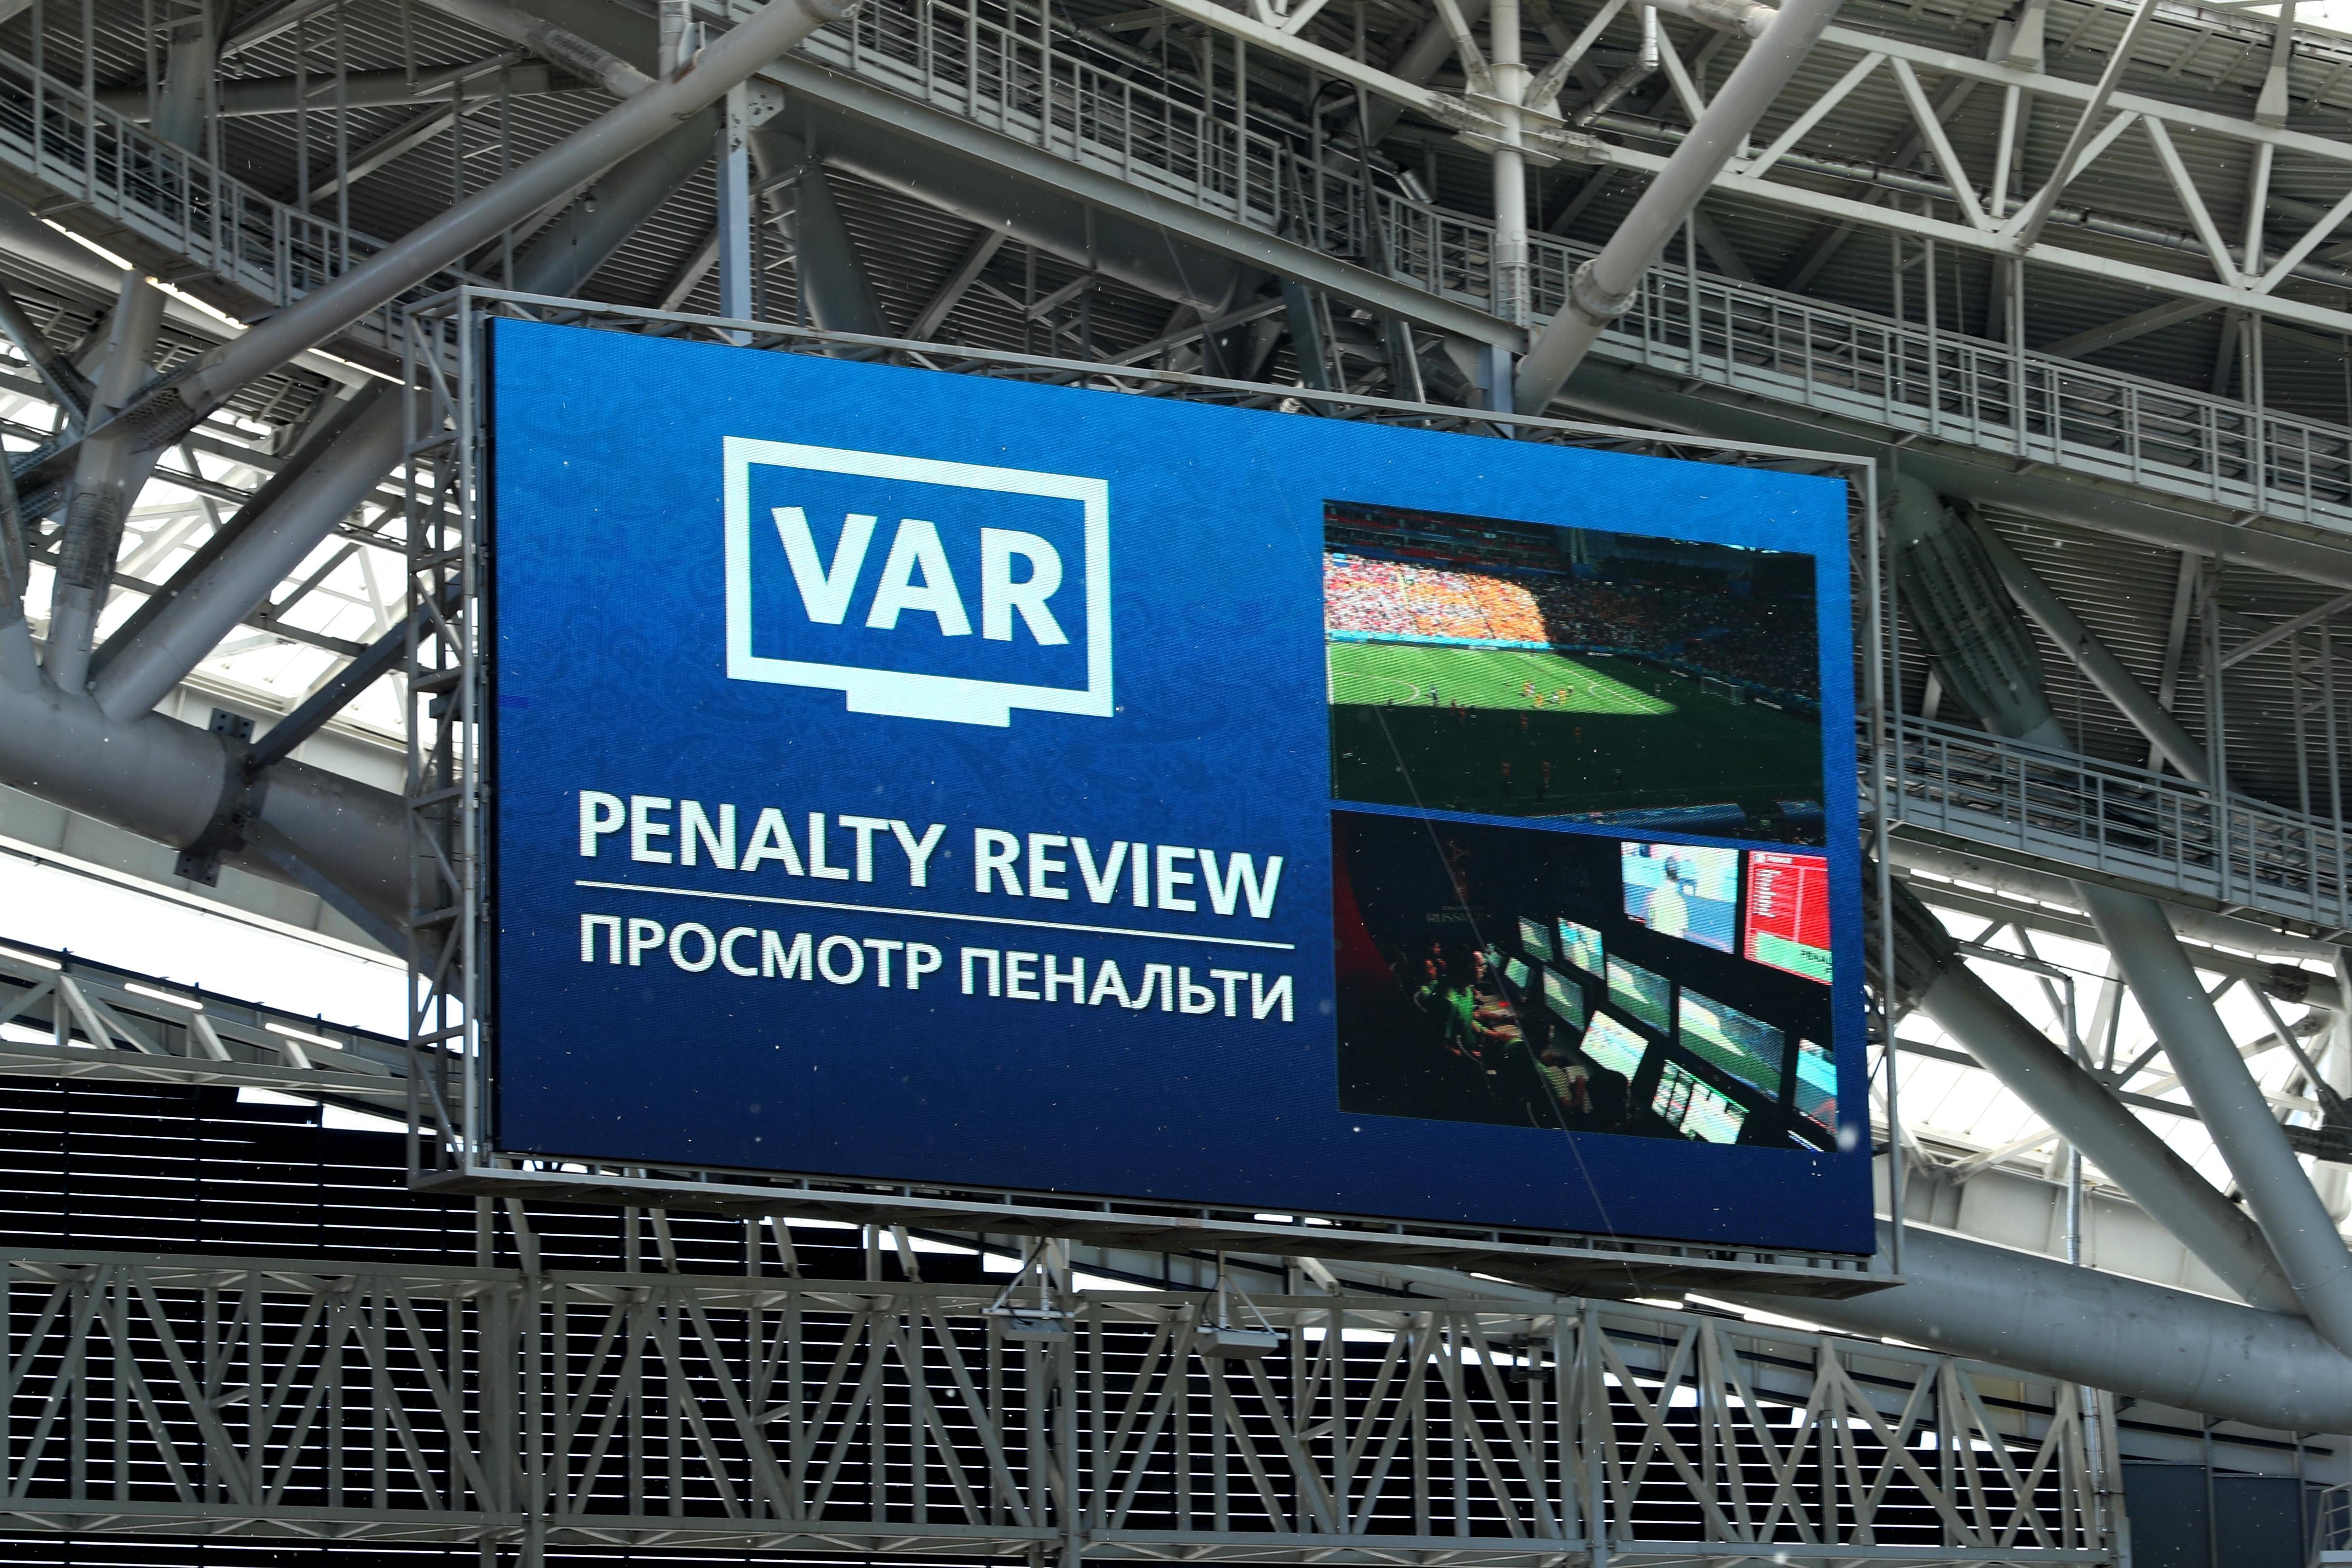 KAZAN, RUSSIA - JUNE 16:  The LED screen shows VAR reviewing a penalty decision during the 2018 FIFA World Cup Russia group C match between France and Australia at Kazan Arena on June 16, 2018 in Kazan, Russia.  (Photo by Catherine Ivill/Getty Images)